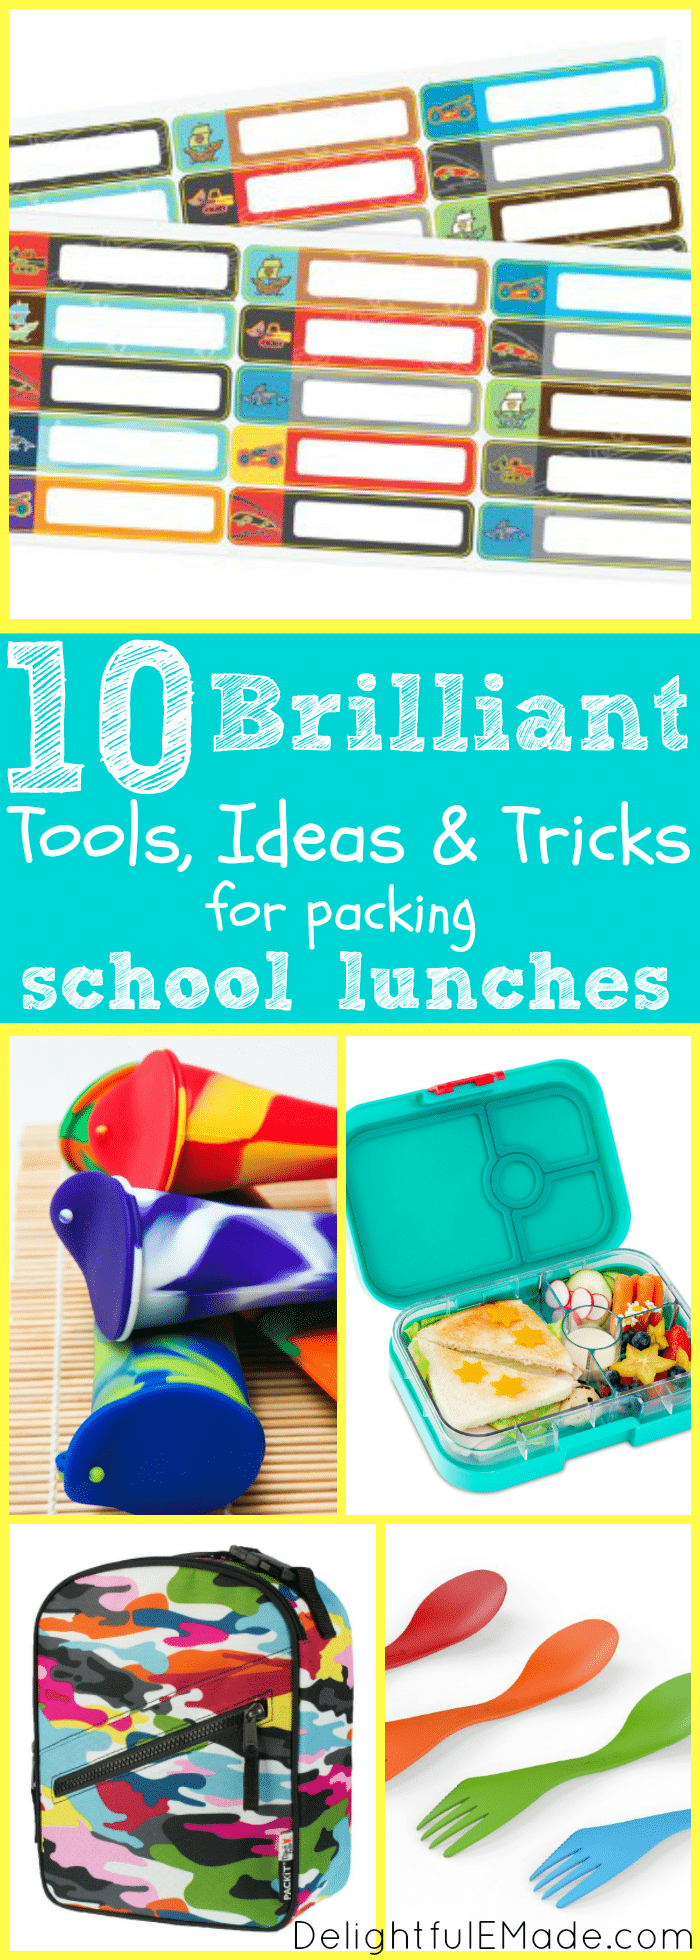 These brilliant lunch packing tools are super helpful in getting lunches ready, and everyone out the door on busy mornings! Lunchboxes, utensils, containers along with recipe ideas will help streamline mornings and help your kids eat a little healthier in the process!